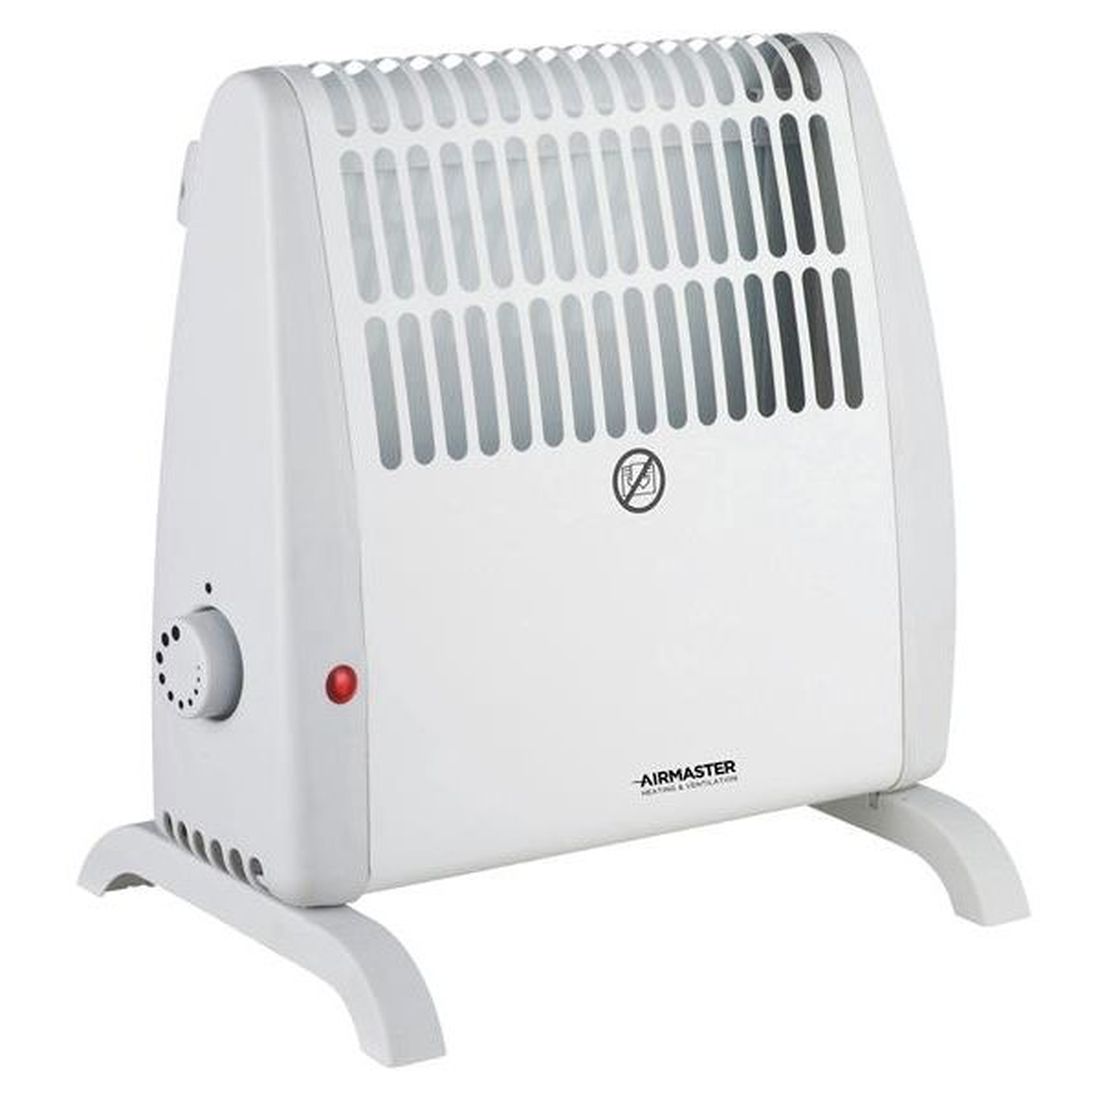 Airmaster Frost Watch Convector Heater 520W 